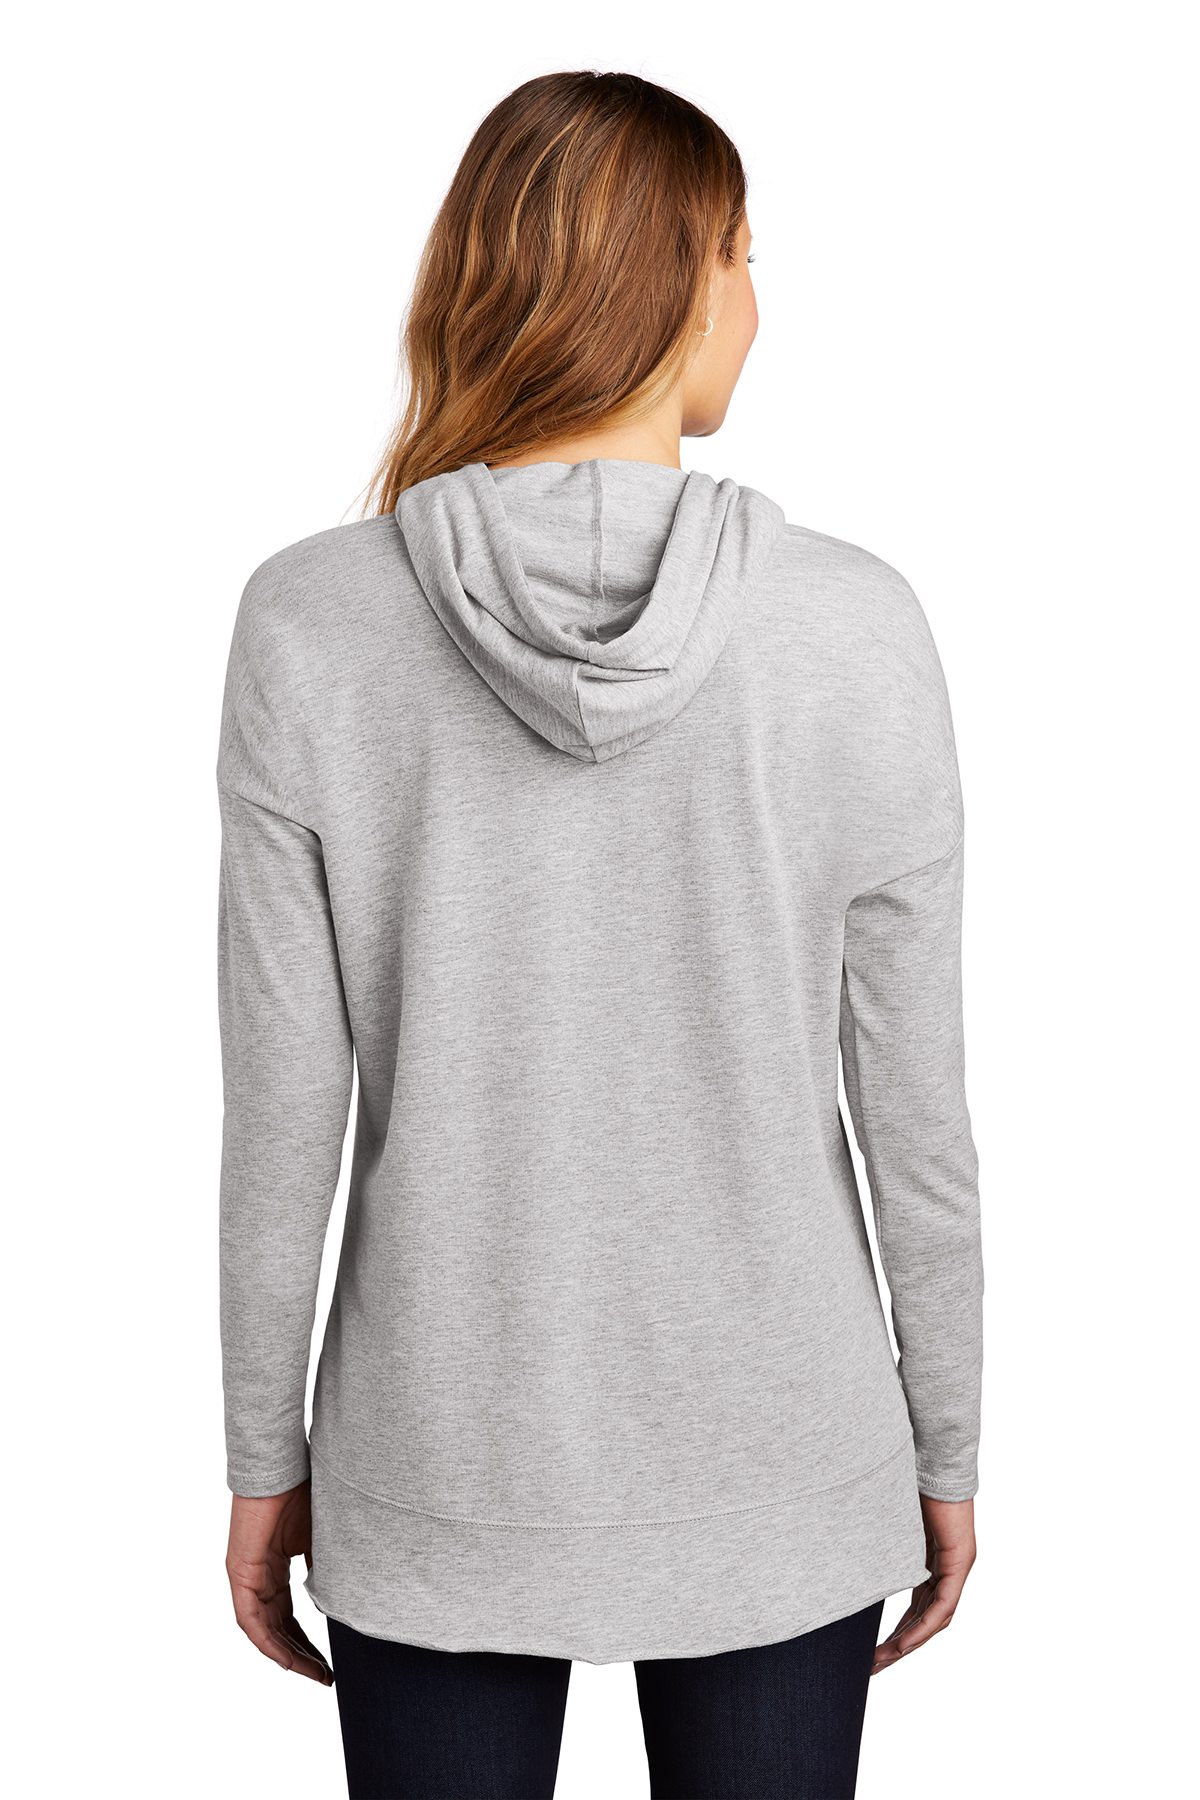 District Women’s Featherweight French Terry Hoodie | Product | District